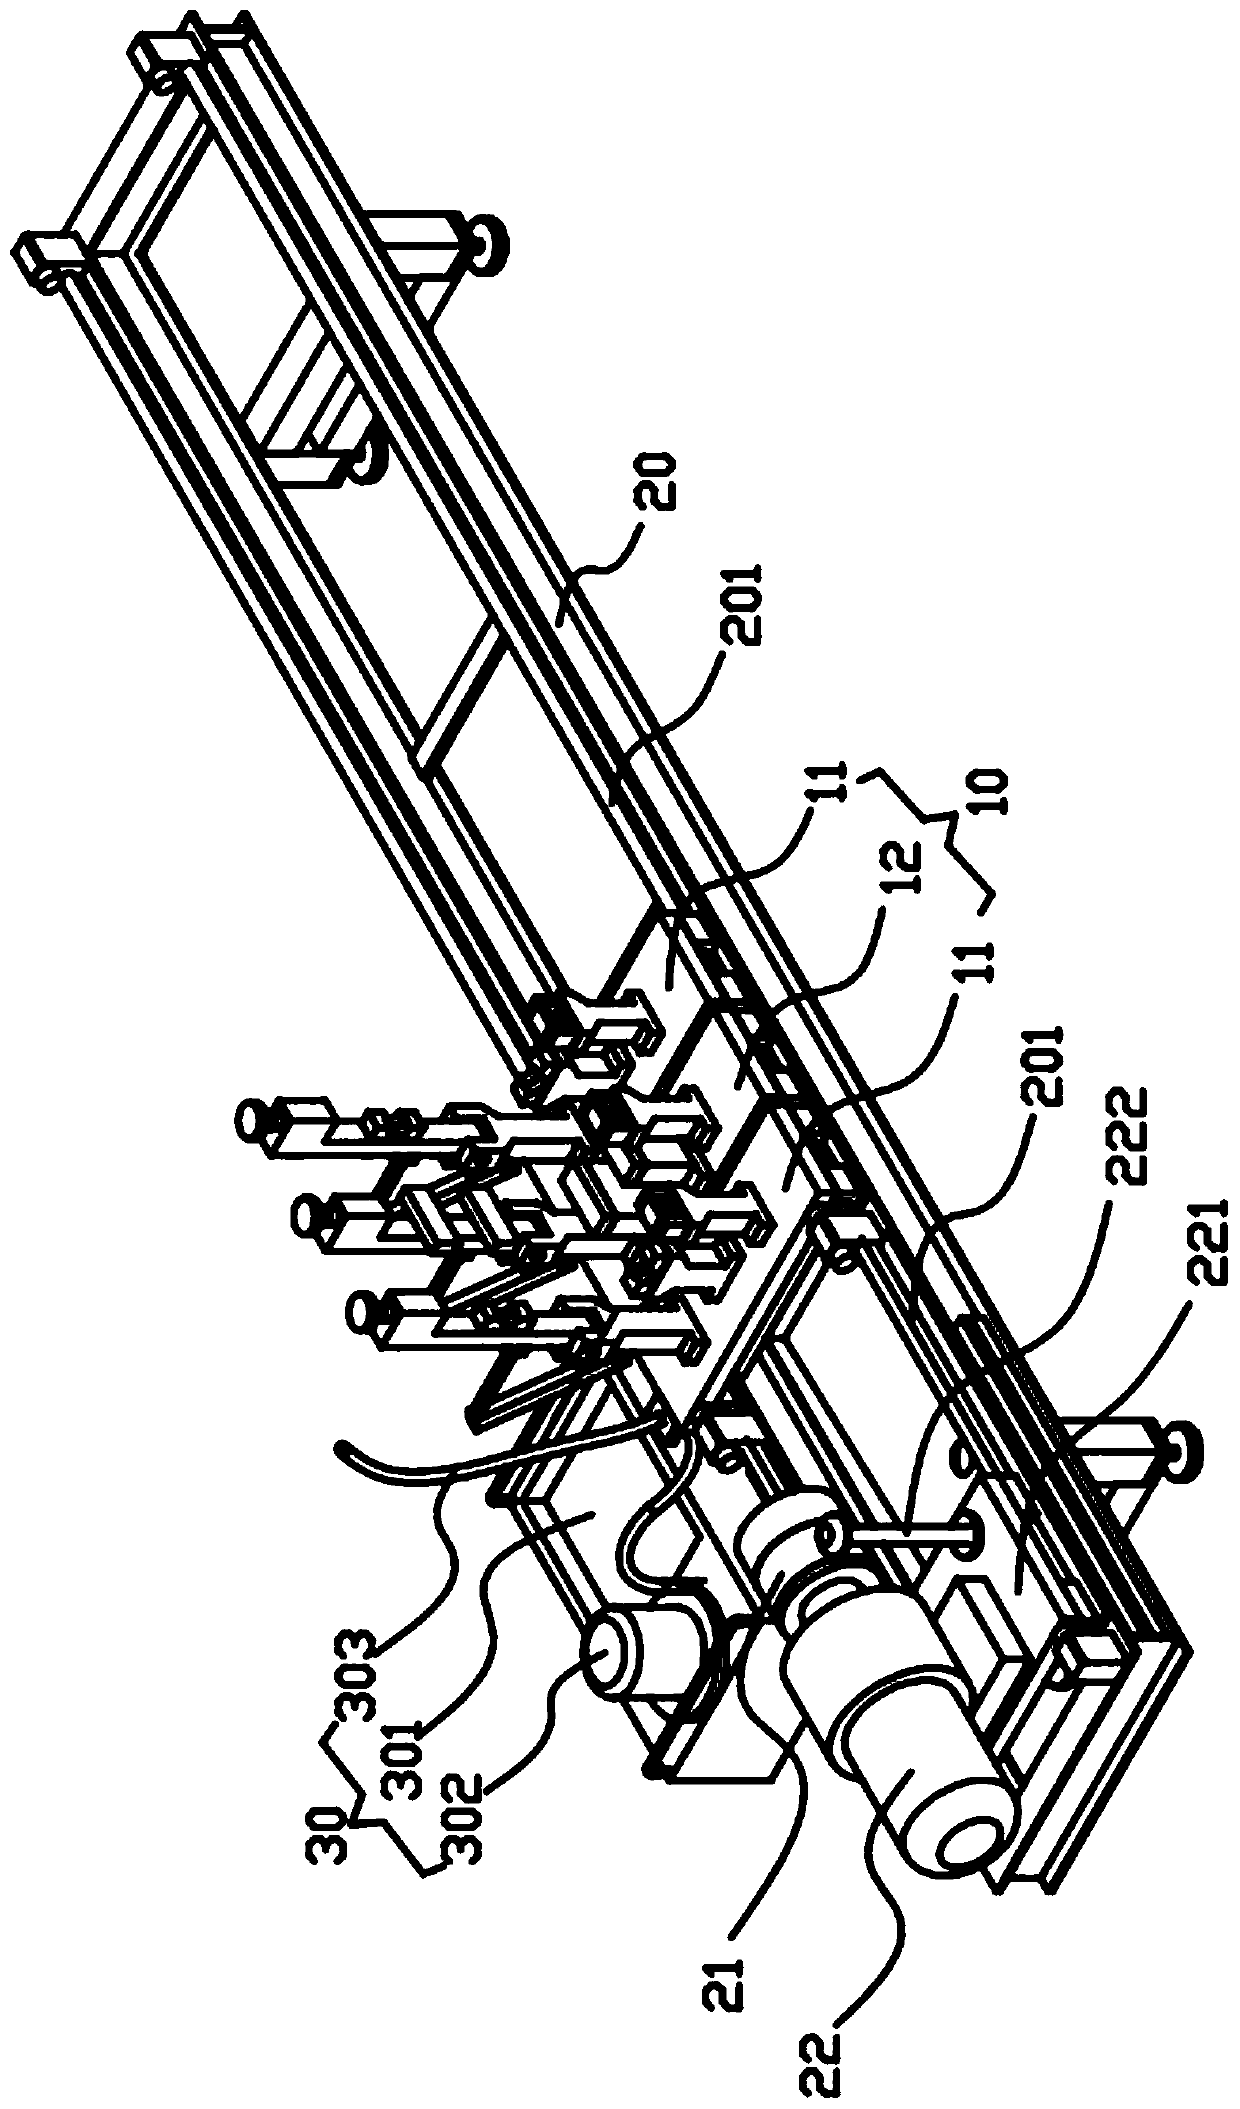 Inclined support assembling and disassembling device capable of automatically oiling